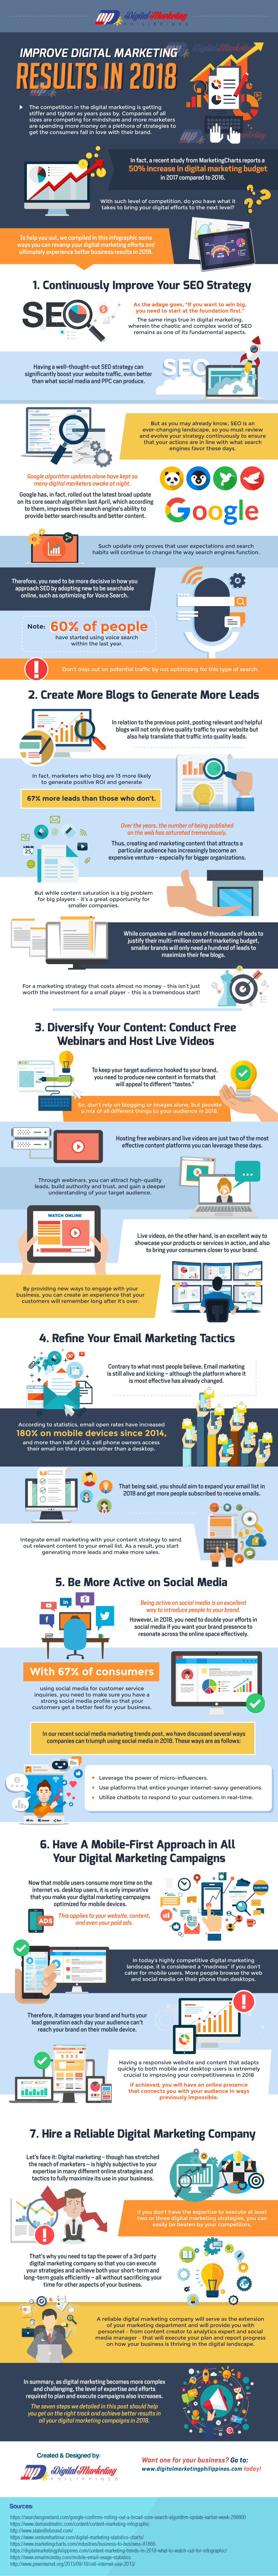 Improve Digital Marketing Results in 2018 (Infographic)